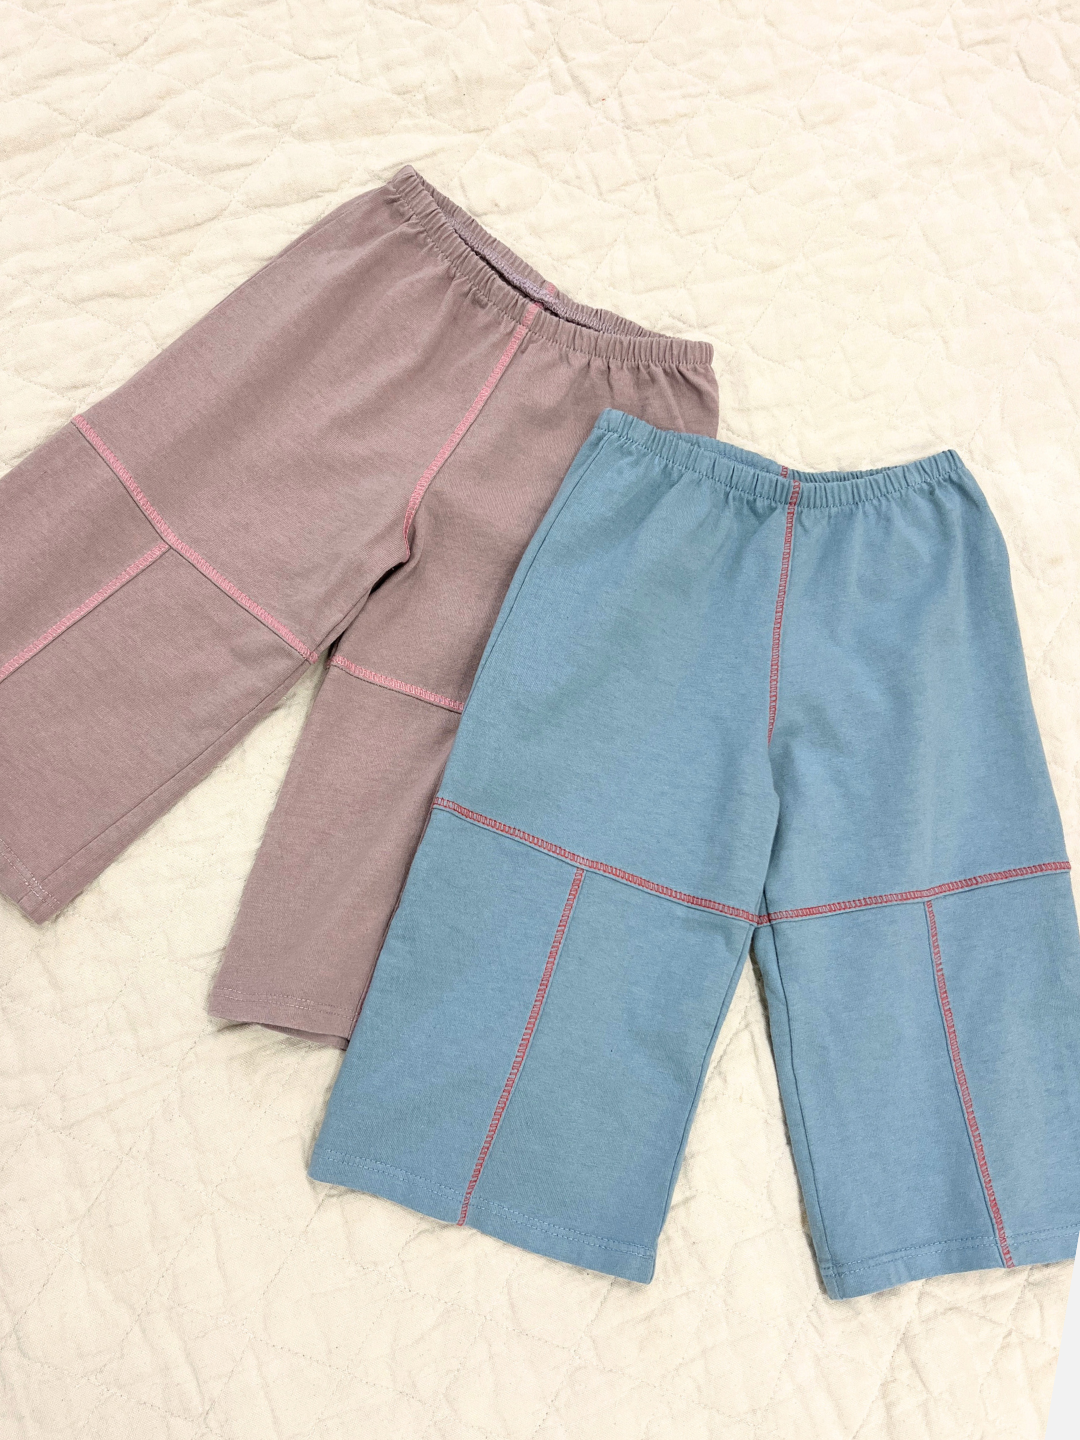 Lavender/Pink and Blue/Red Contrast Stitch Baby Pants laid on the ground next to each other.